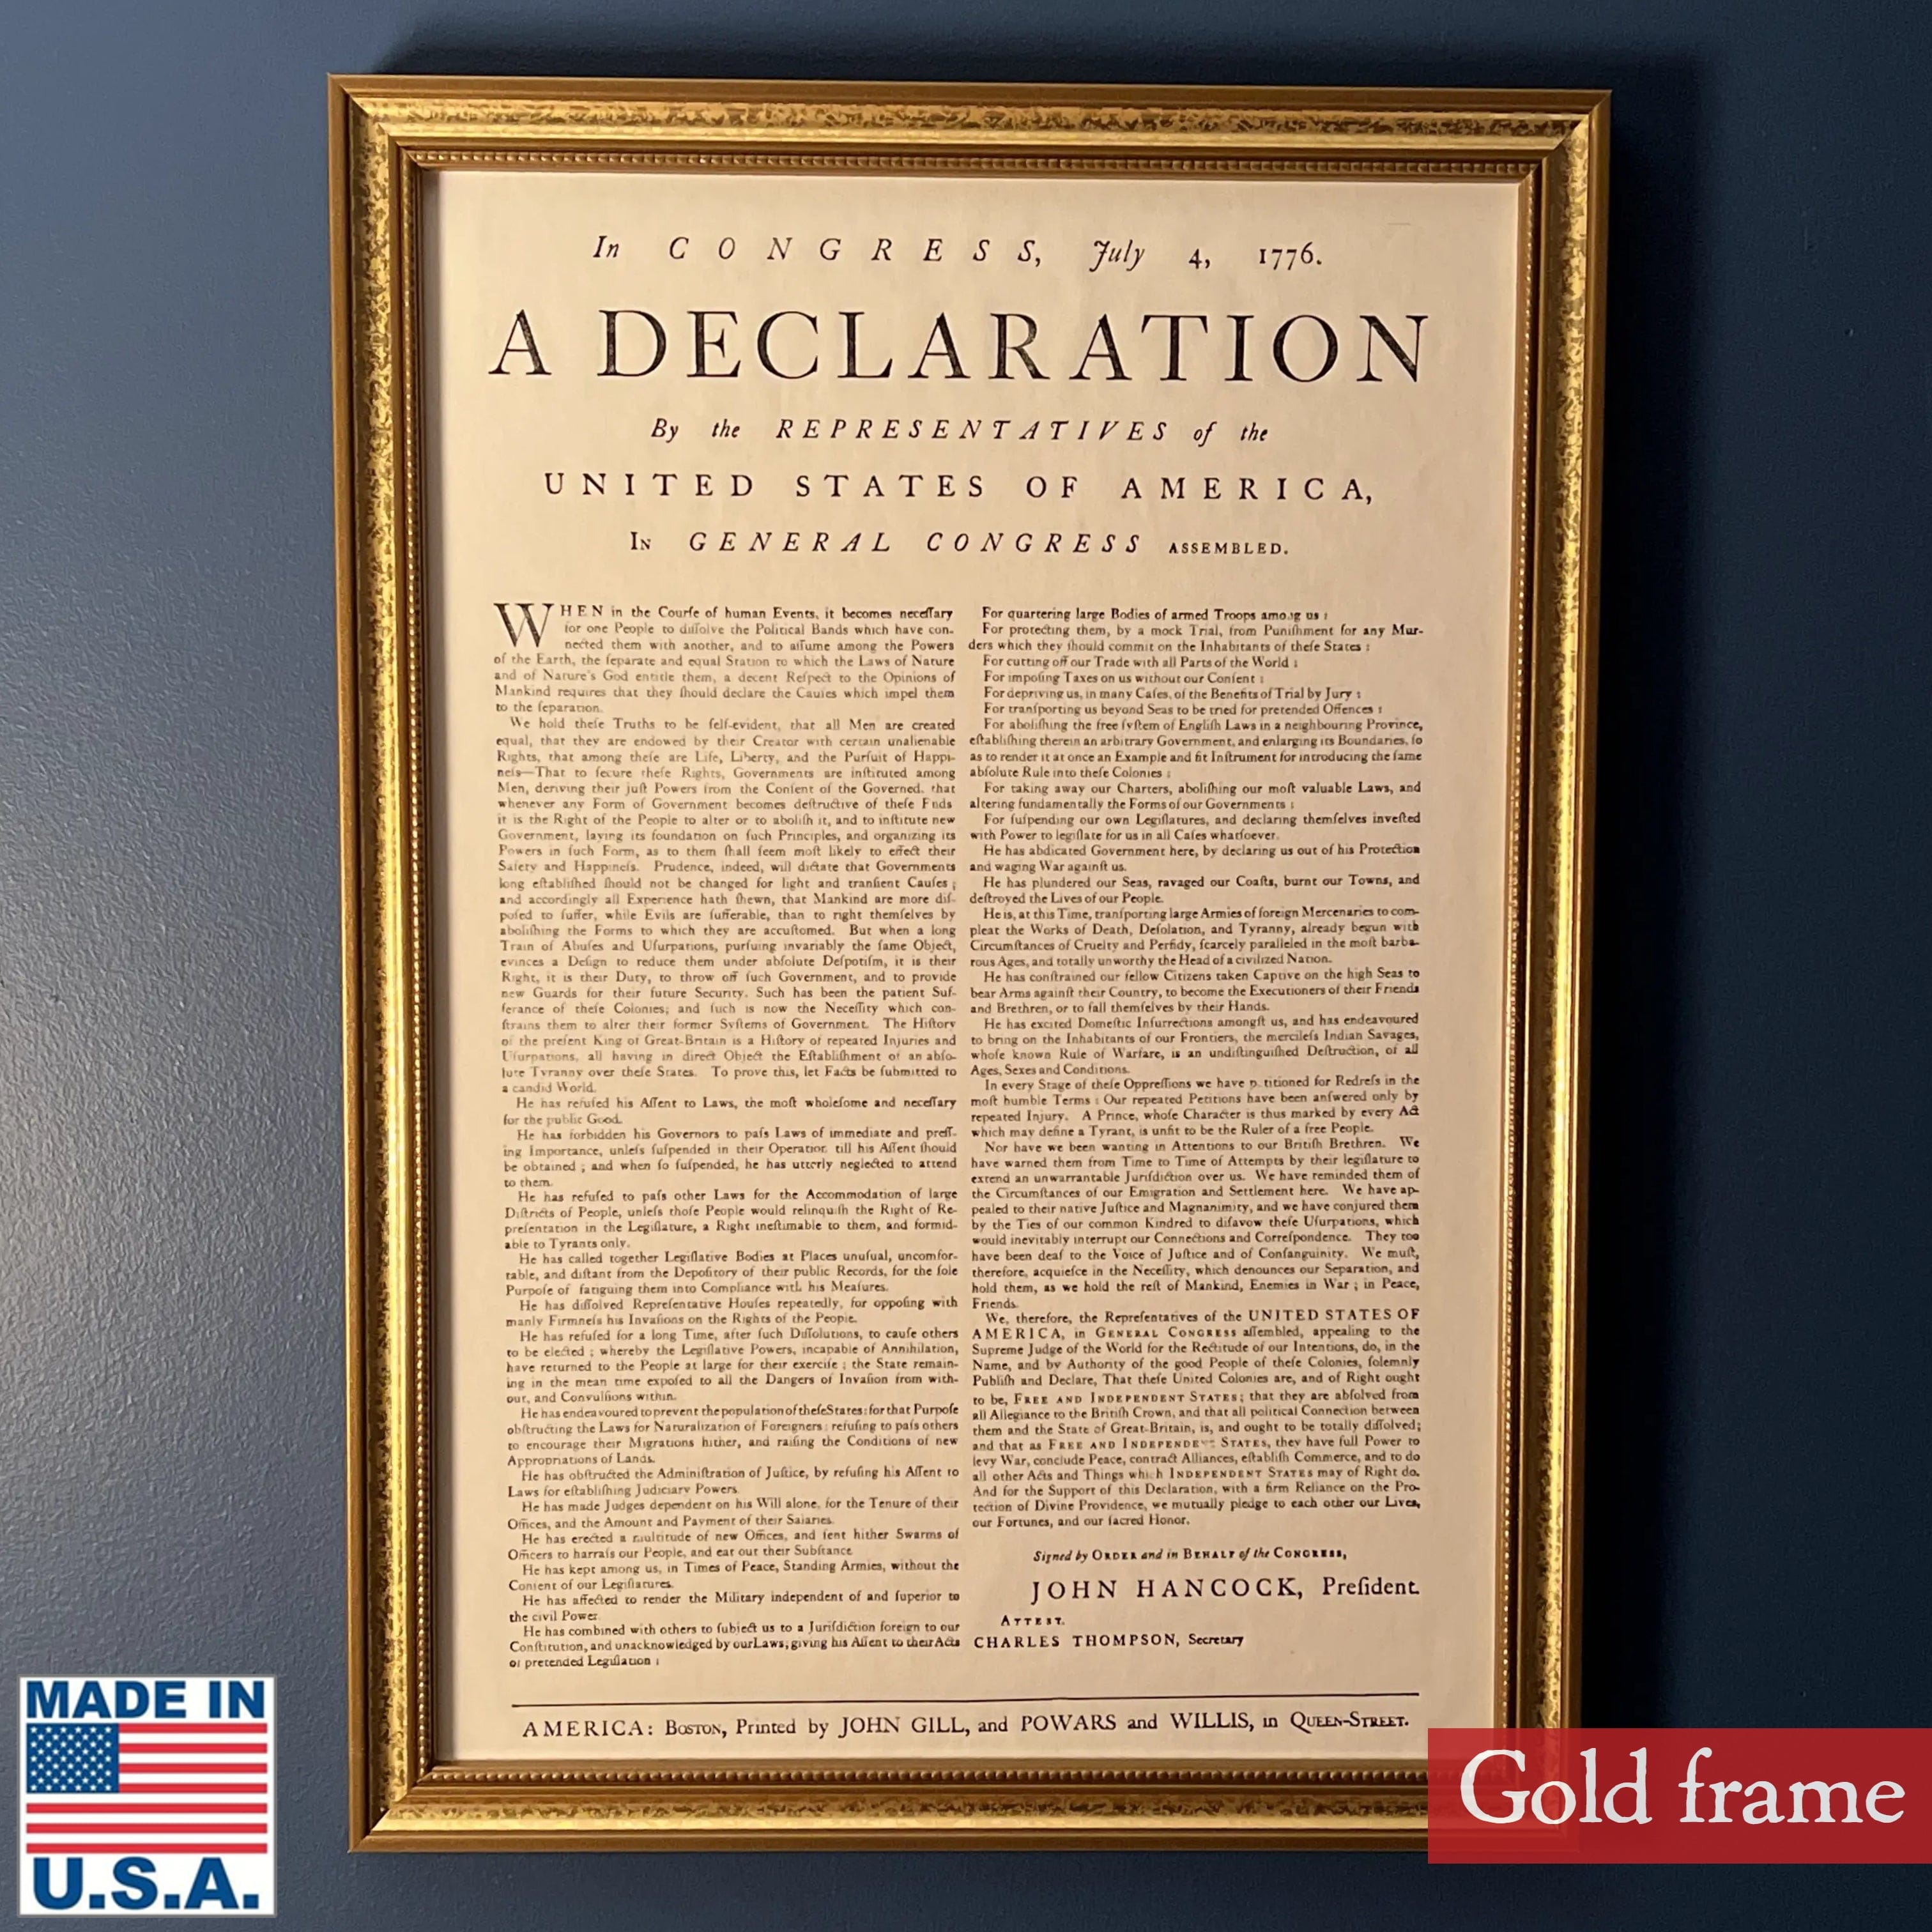 U.S. Constitution from Edes & Gill in Boston with Washington letter – The  History List